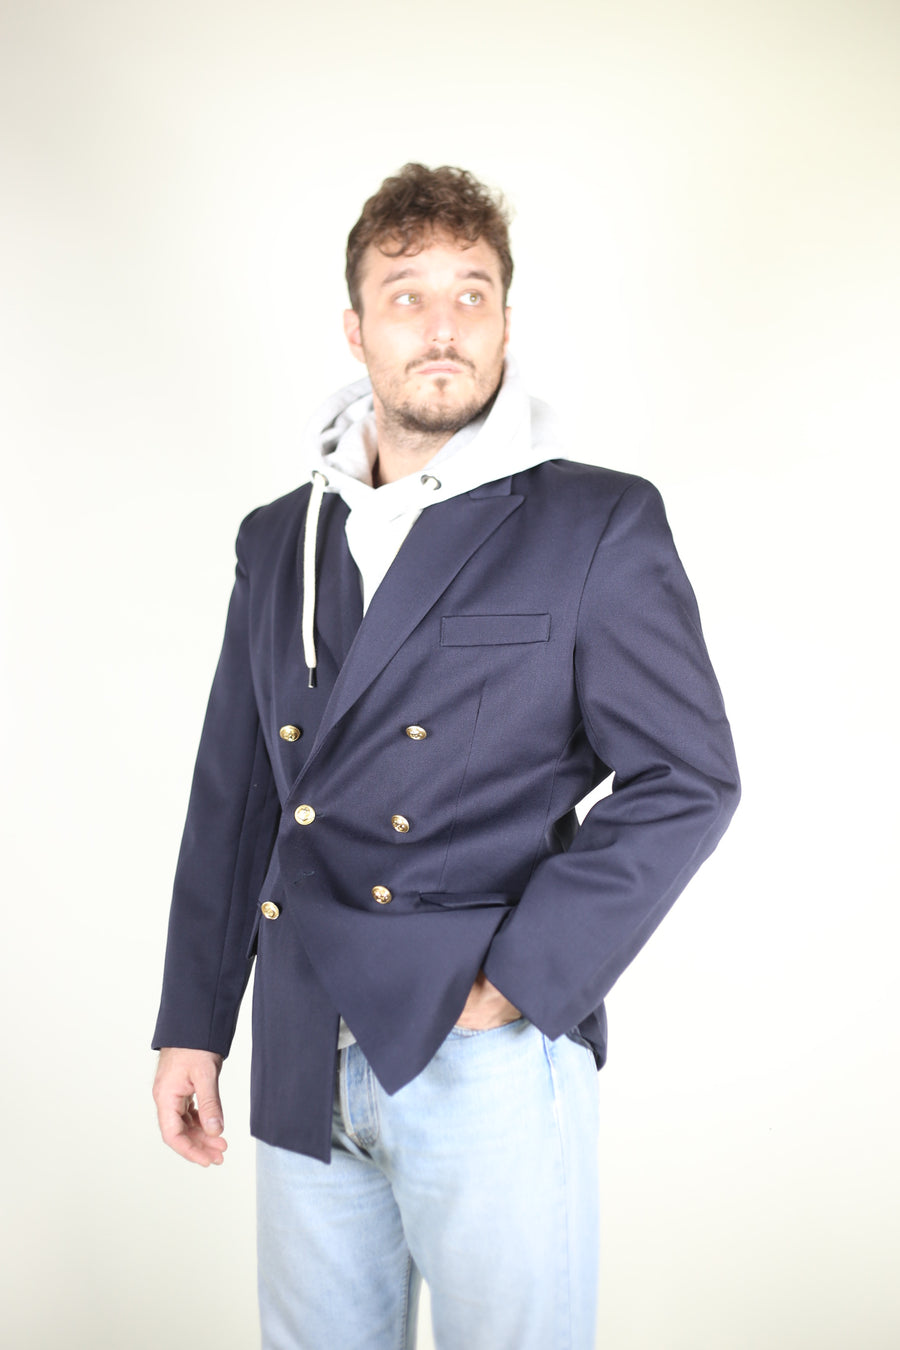 Navy double-breasted jacket